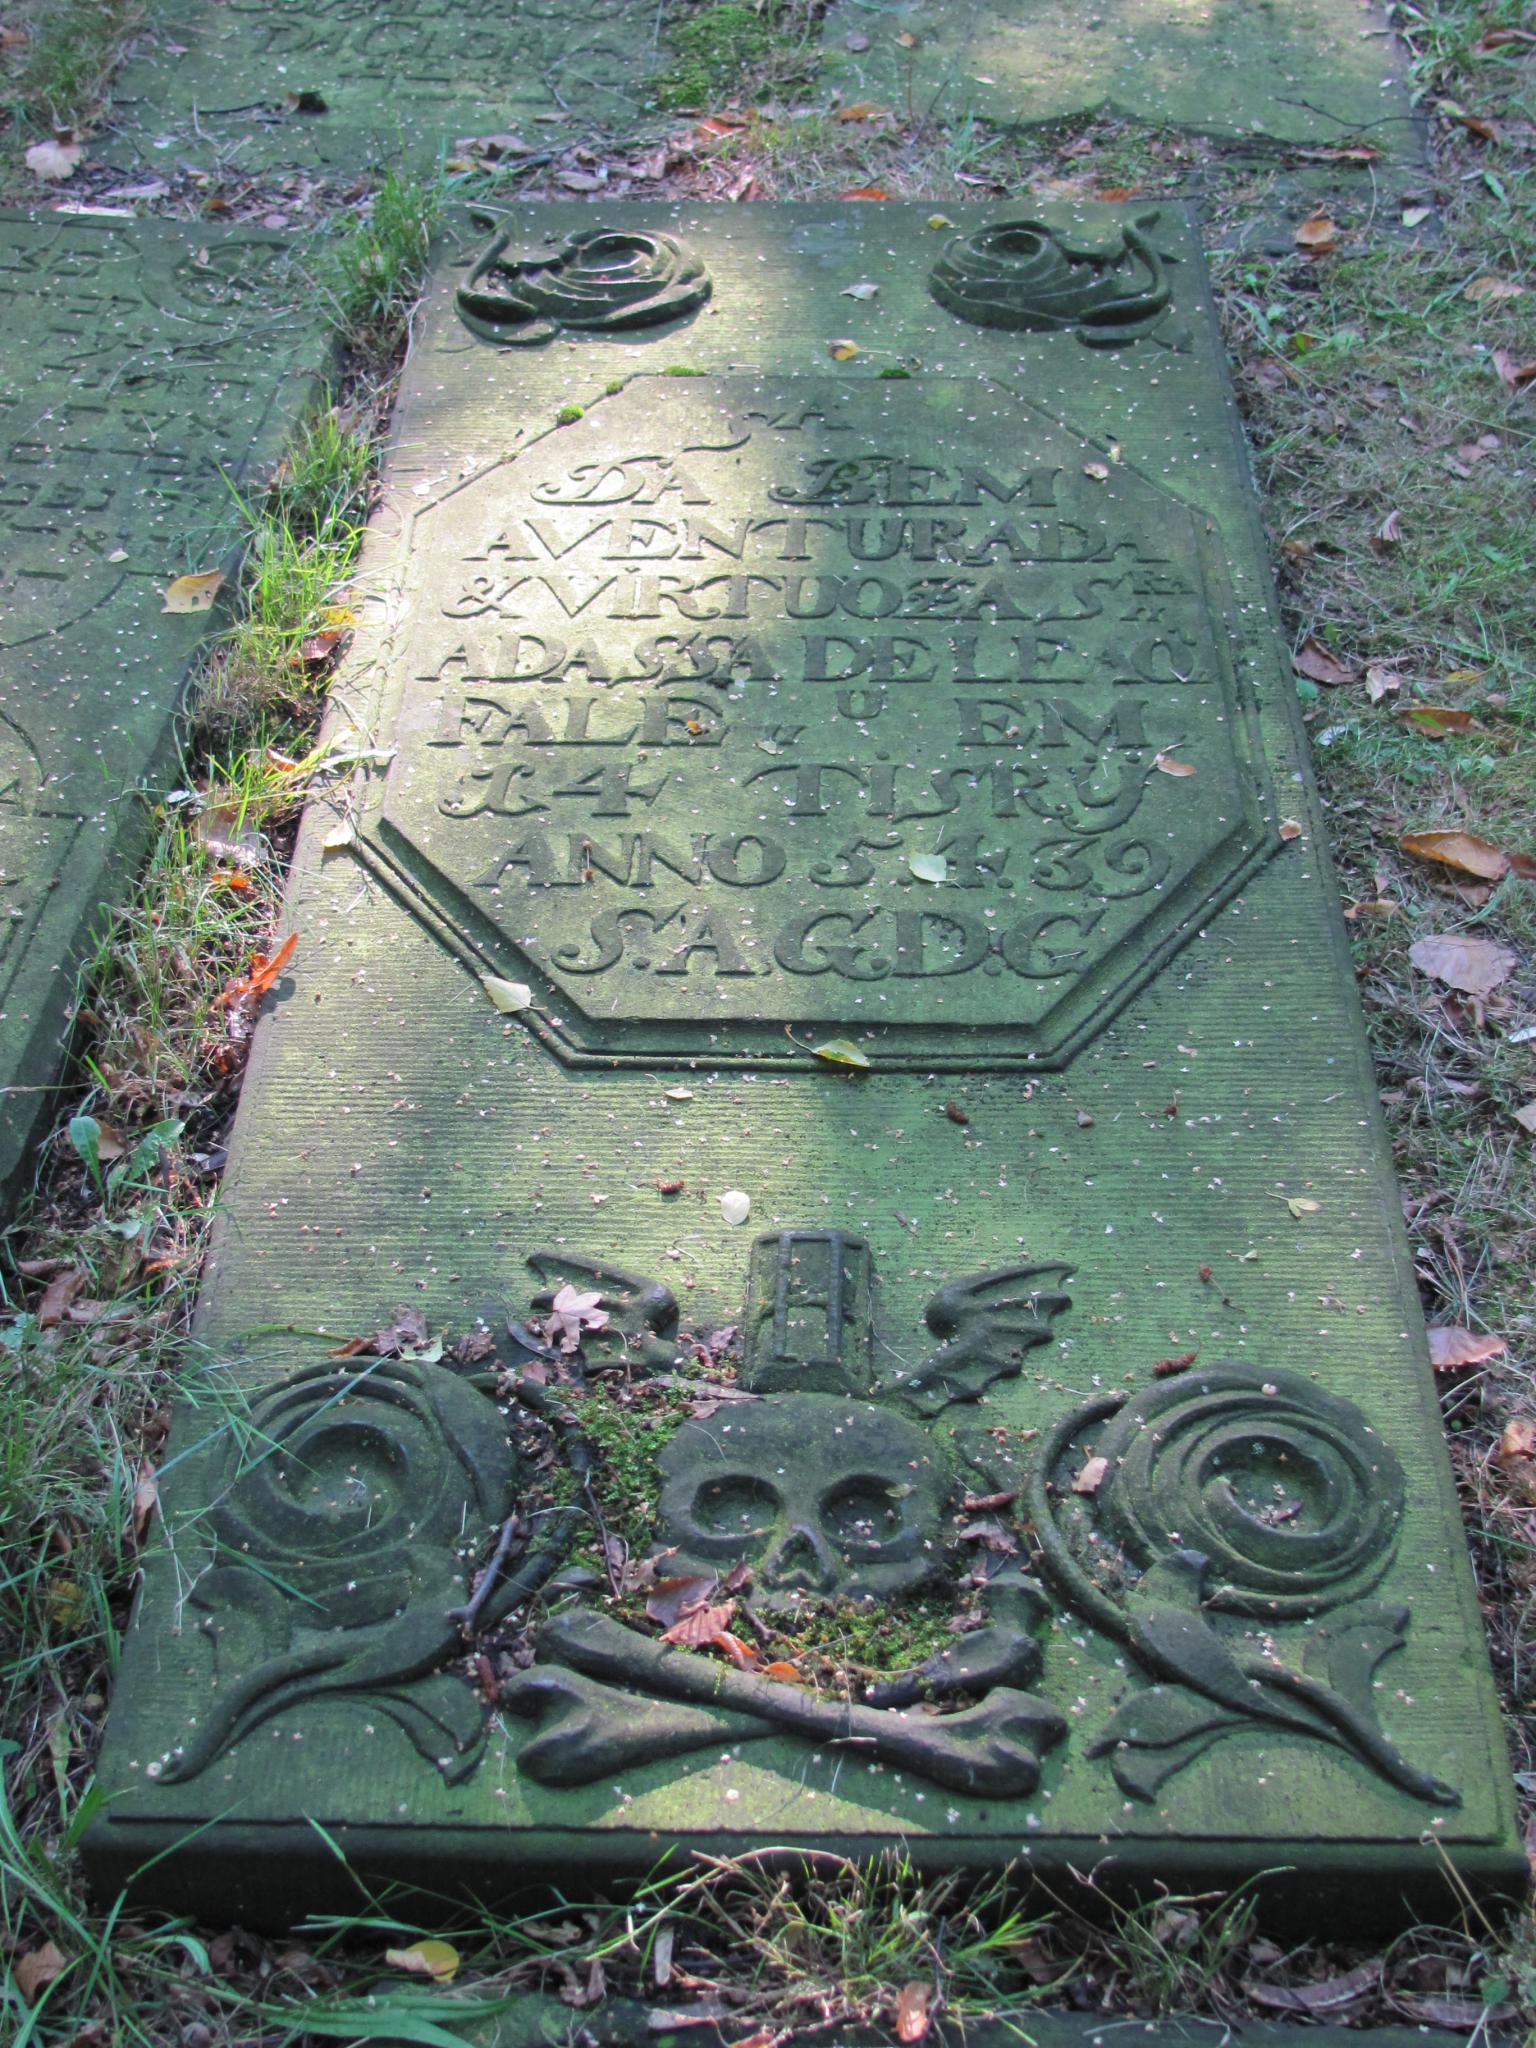 Gravestone on ground with inscription and engraving of skull and bones.